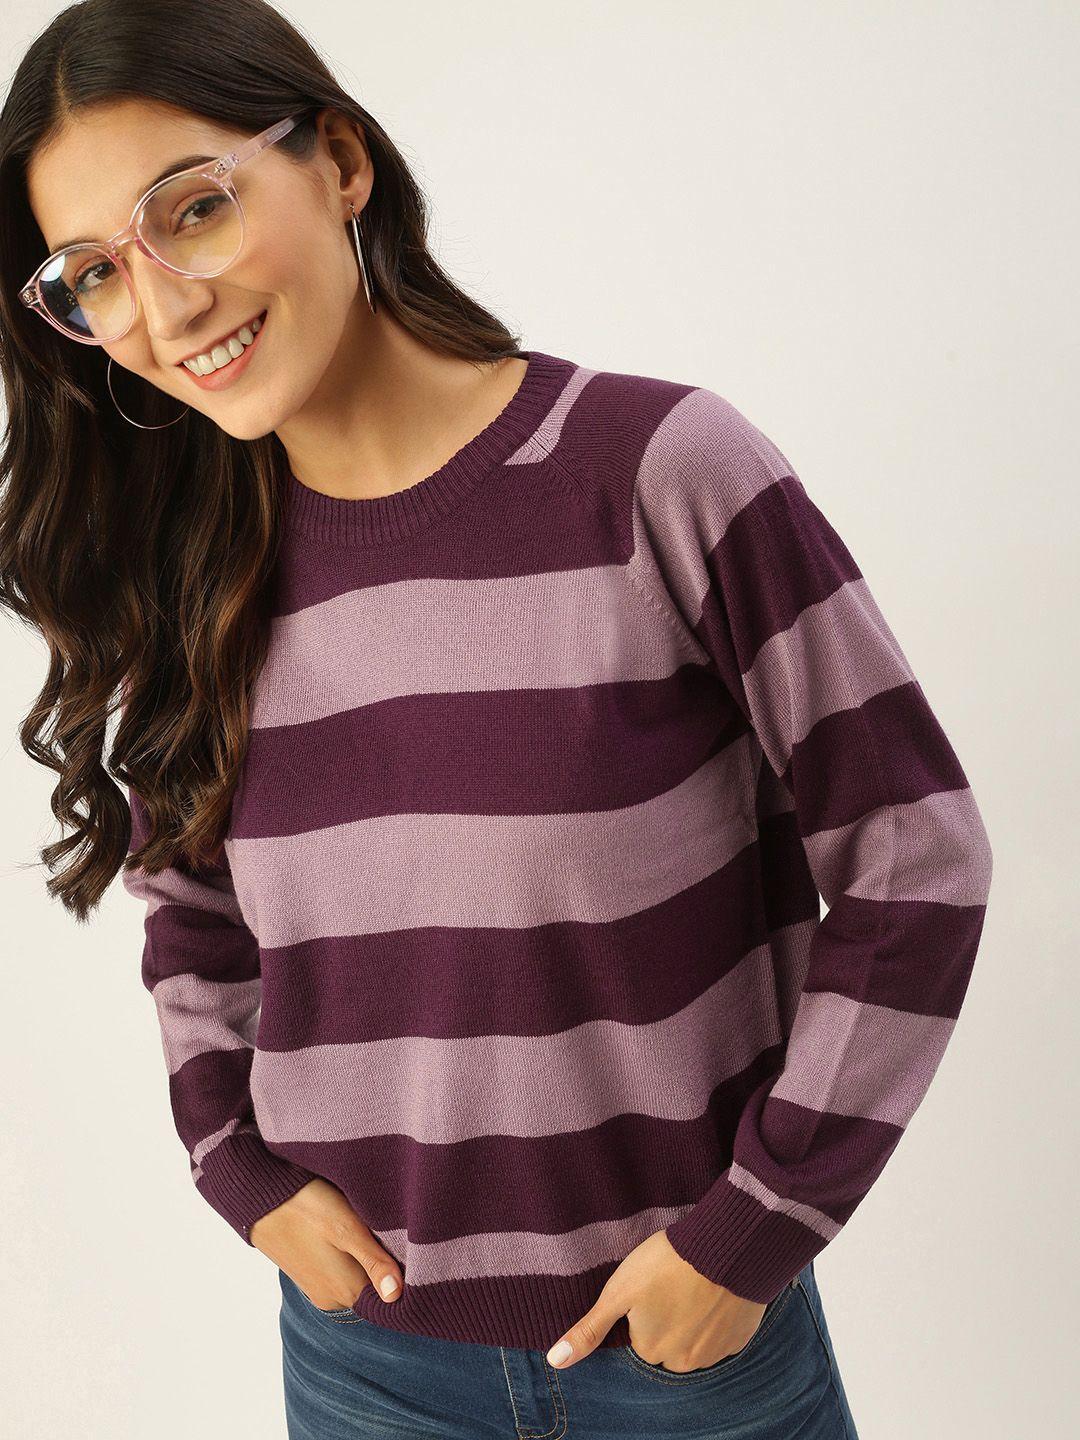 forever 21 purple & mauve knitted striped top